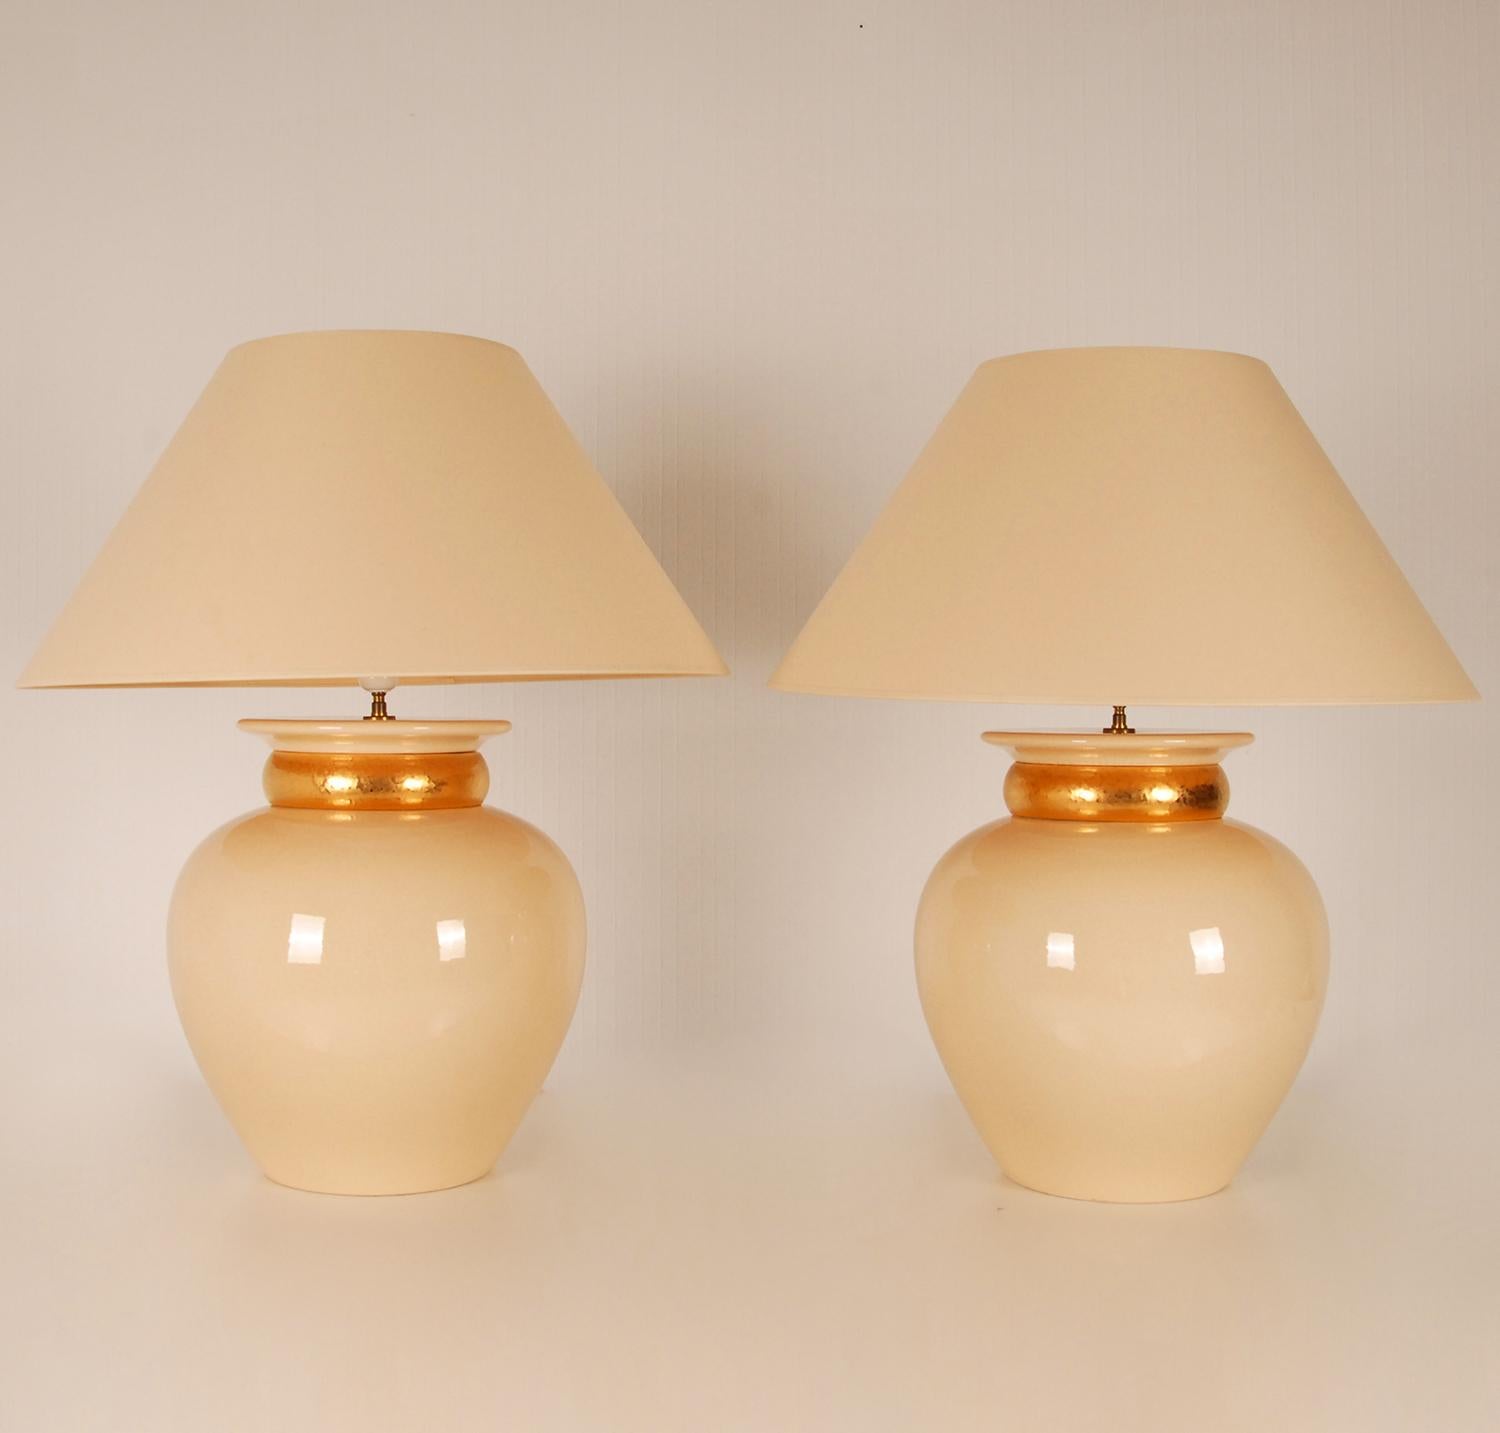 Vintage French Ceramic Robert Kostka Table Lamps Gold and Beige  - a Pair For Sale 2